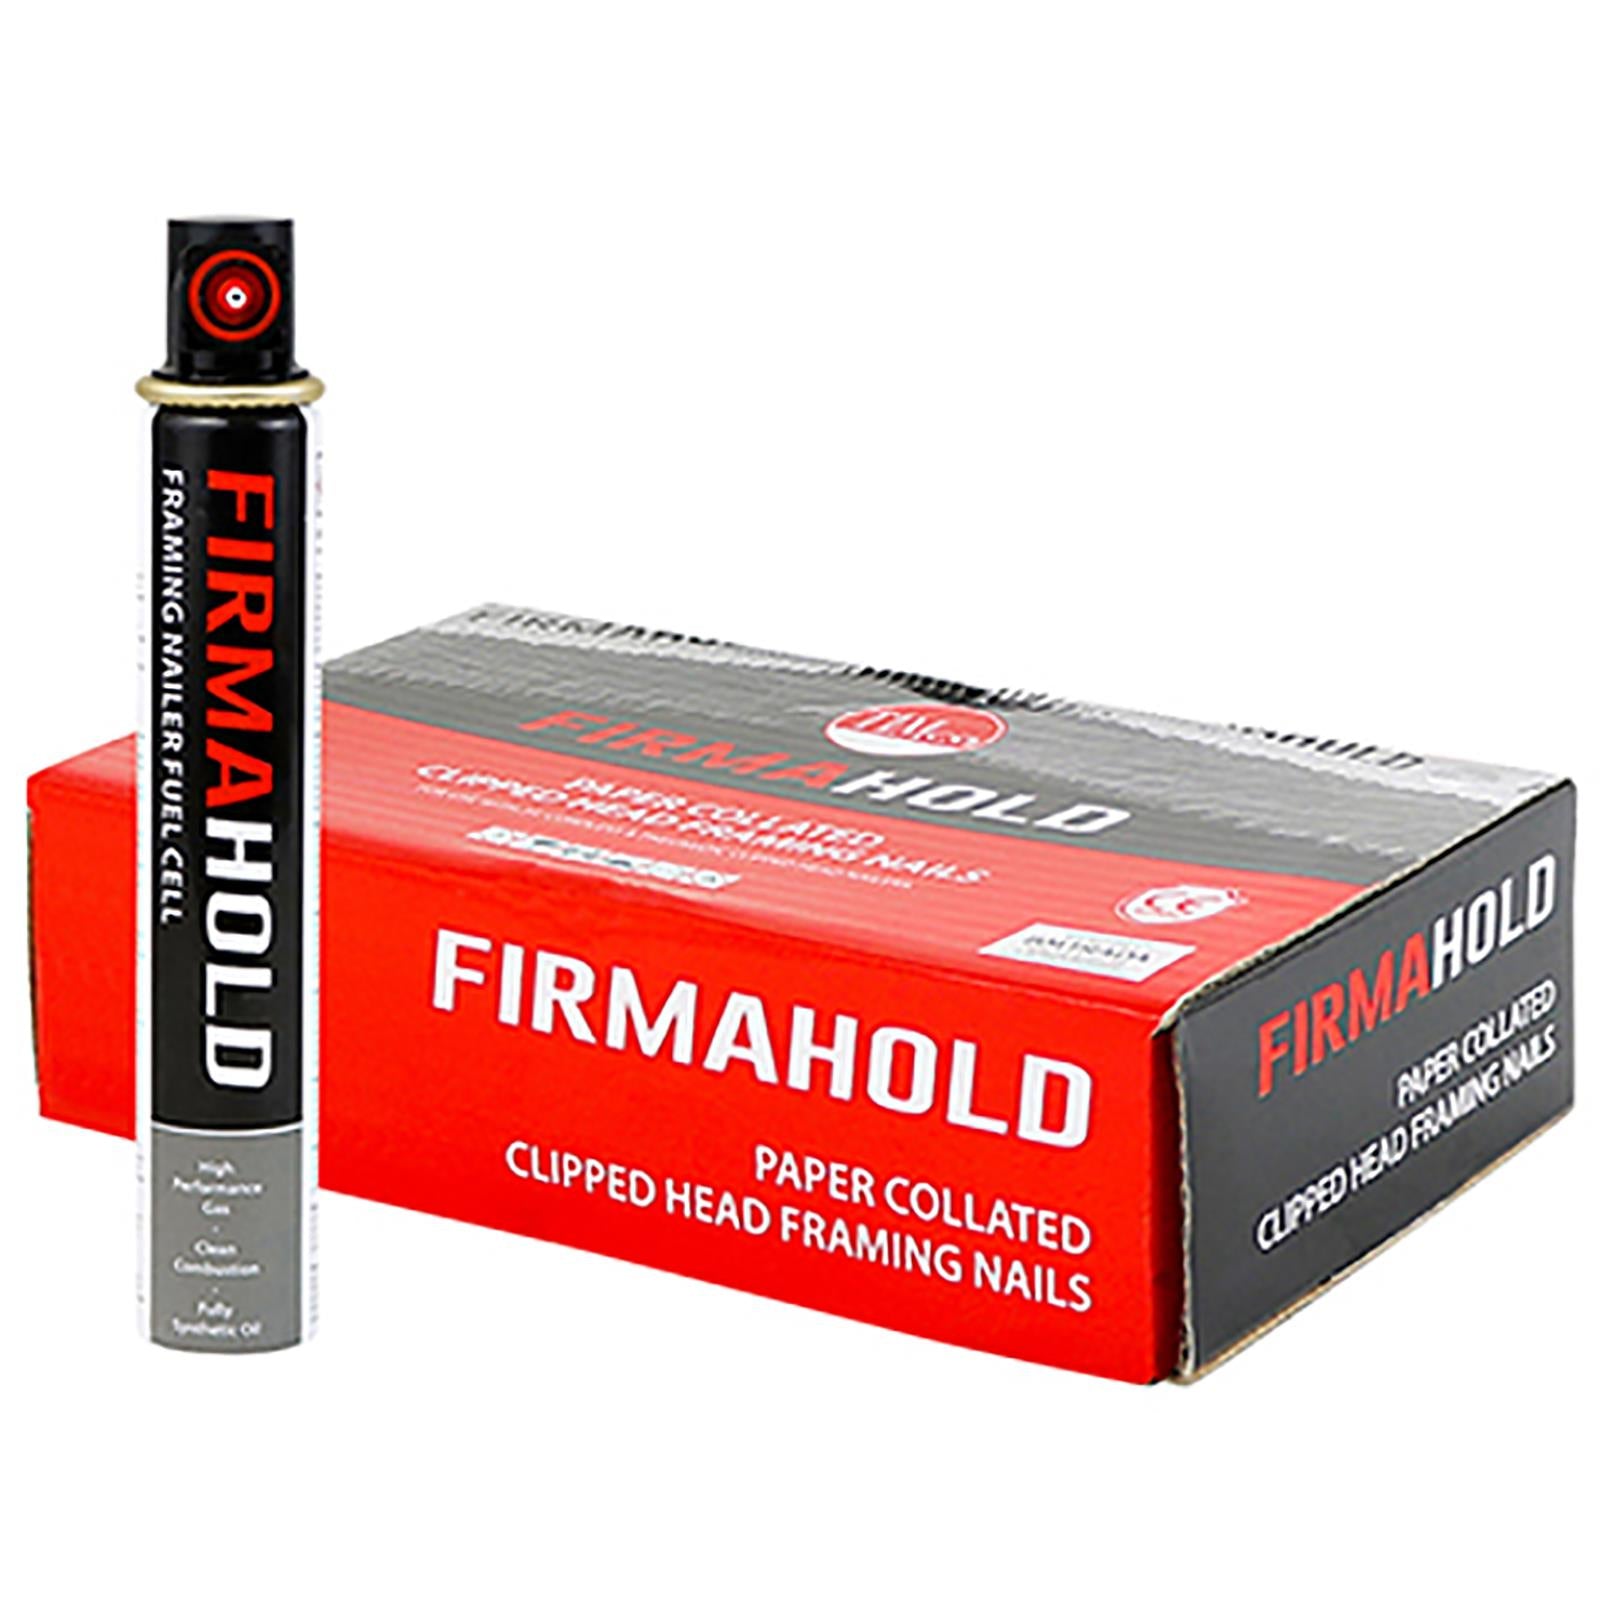 TIMCO FirmaHold Clipped Head Collated Nails Retail Pack with Gas Carbon Steel